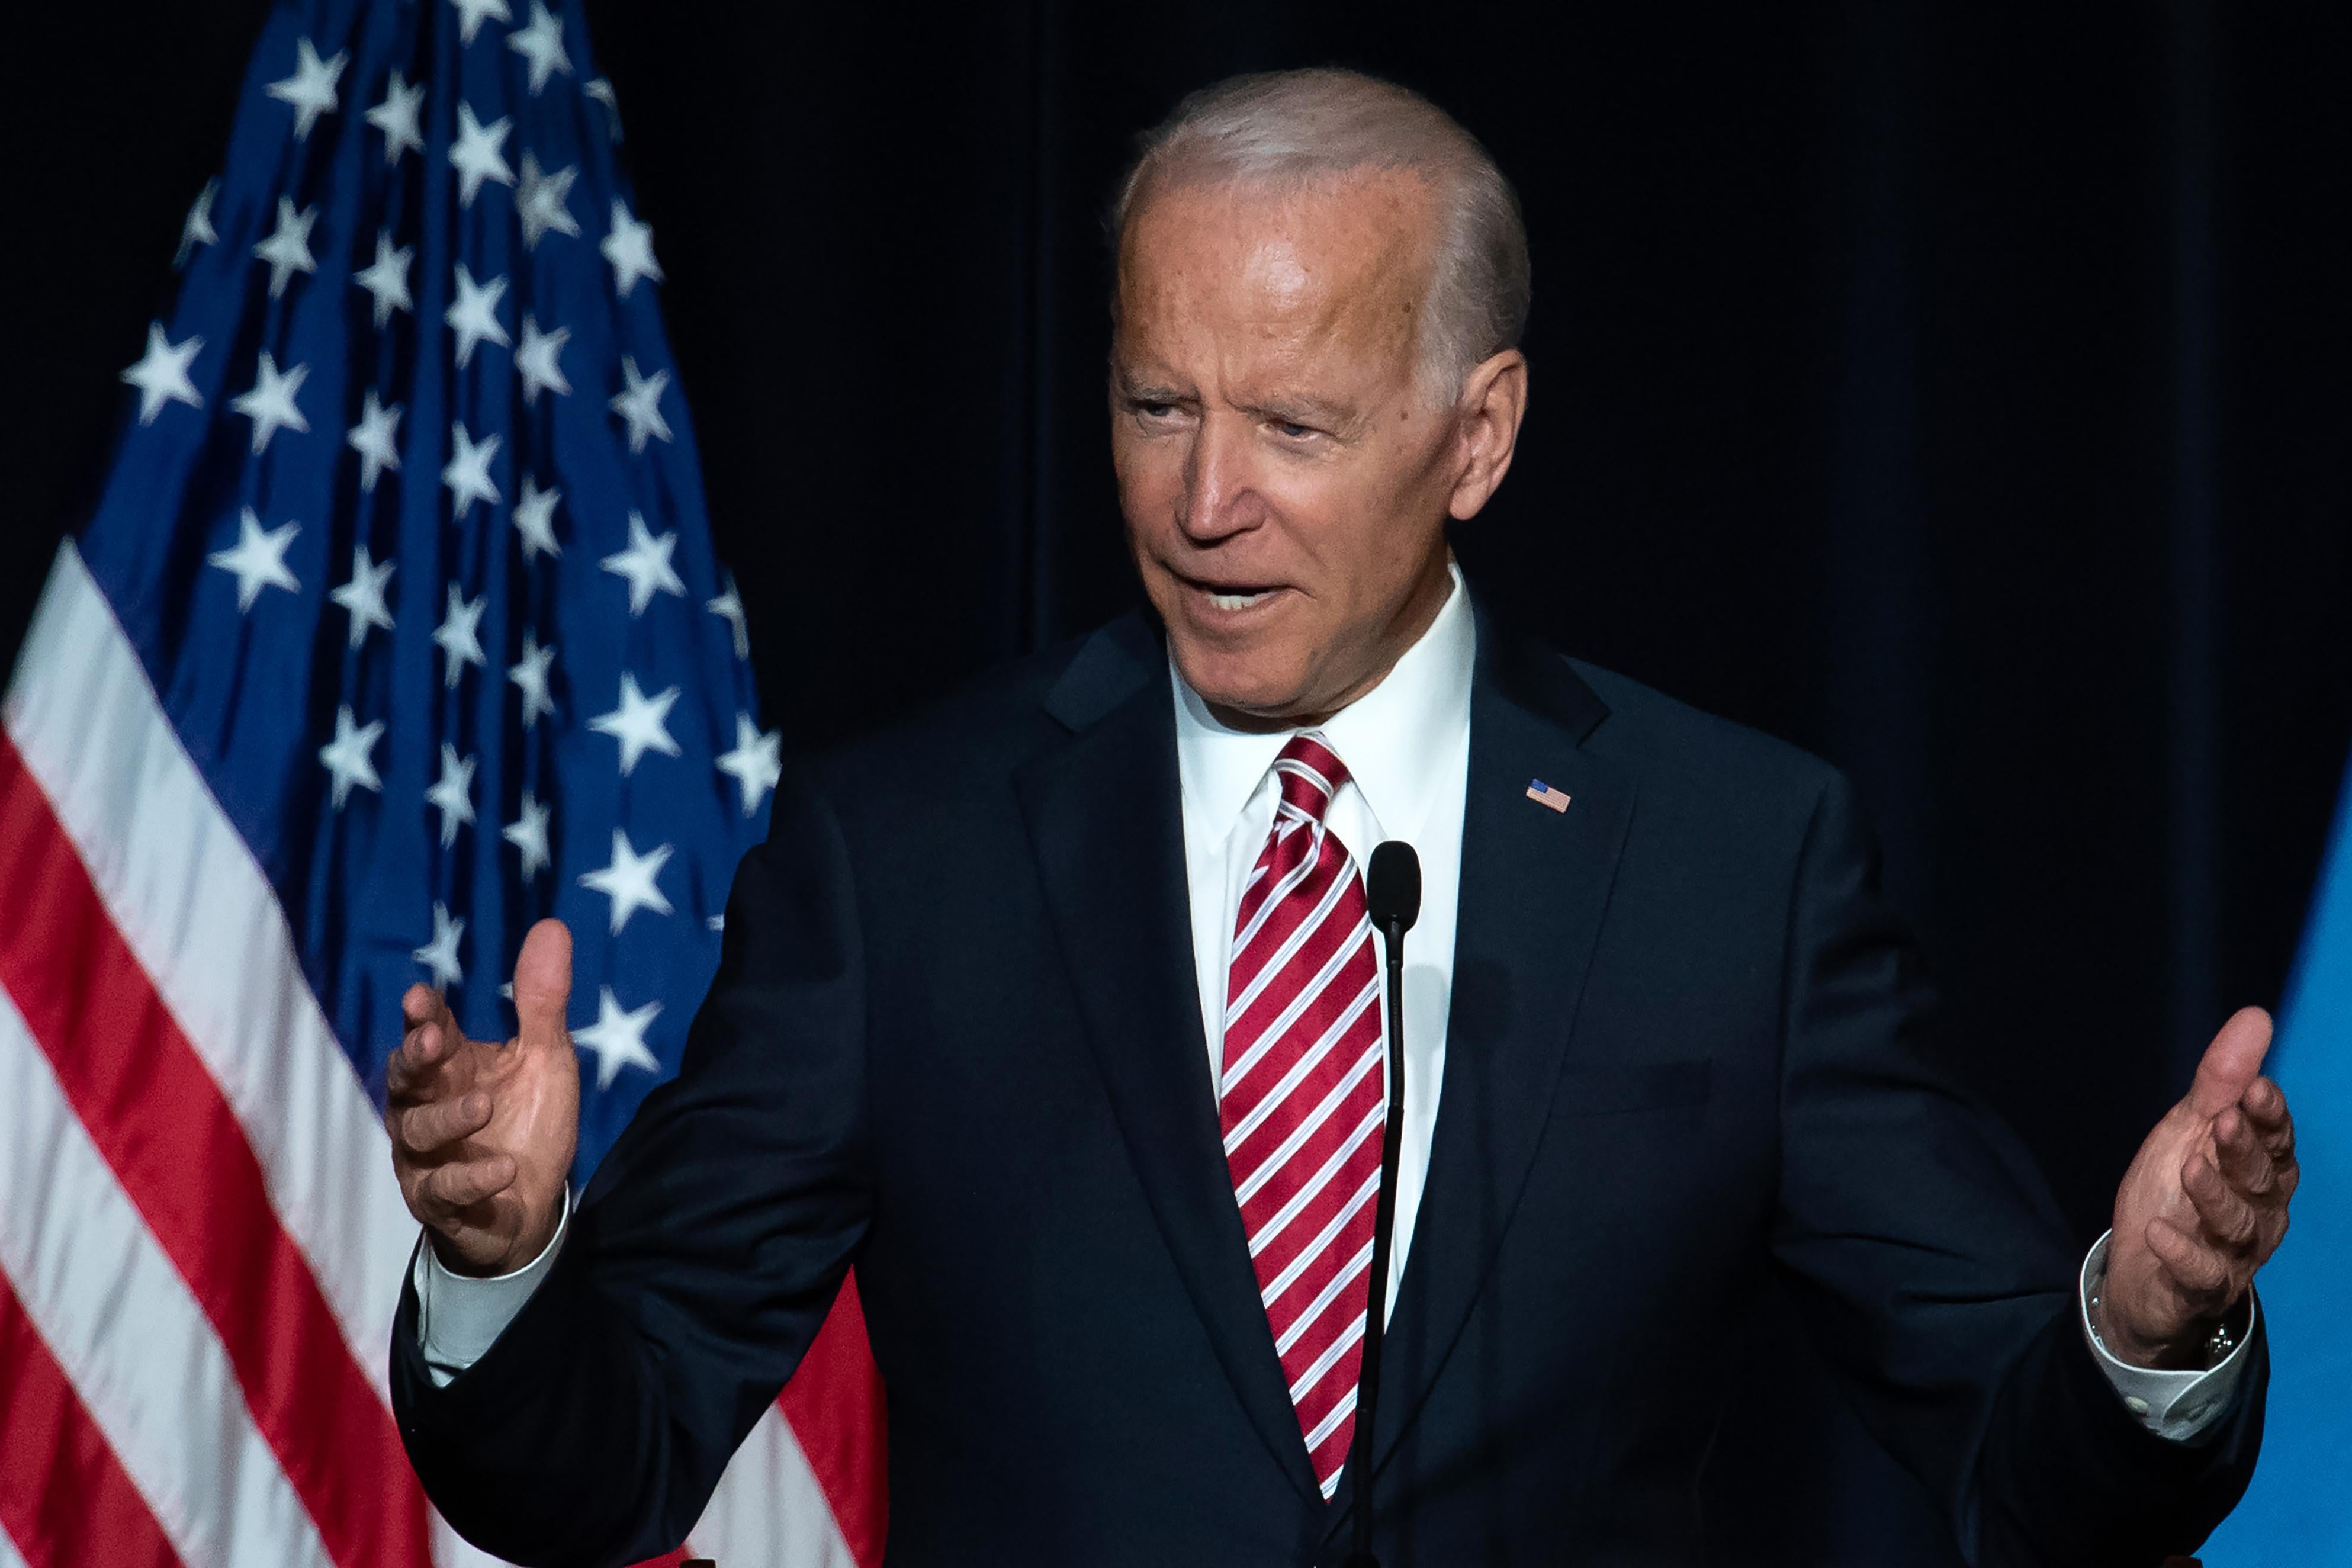 Biden speaking at a mic, arms outstretched, with an American flag behind him.